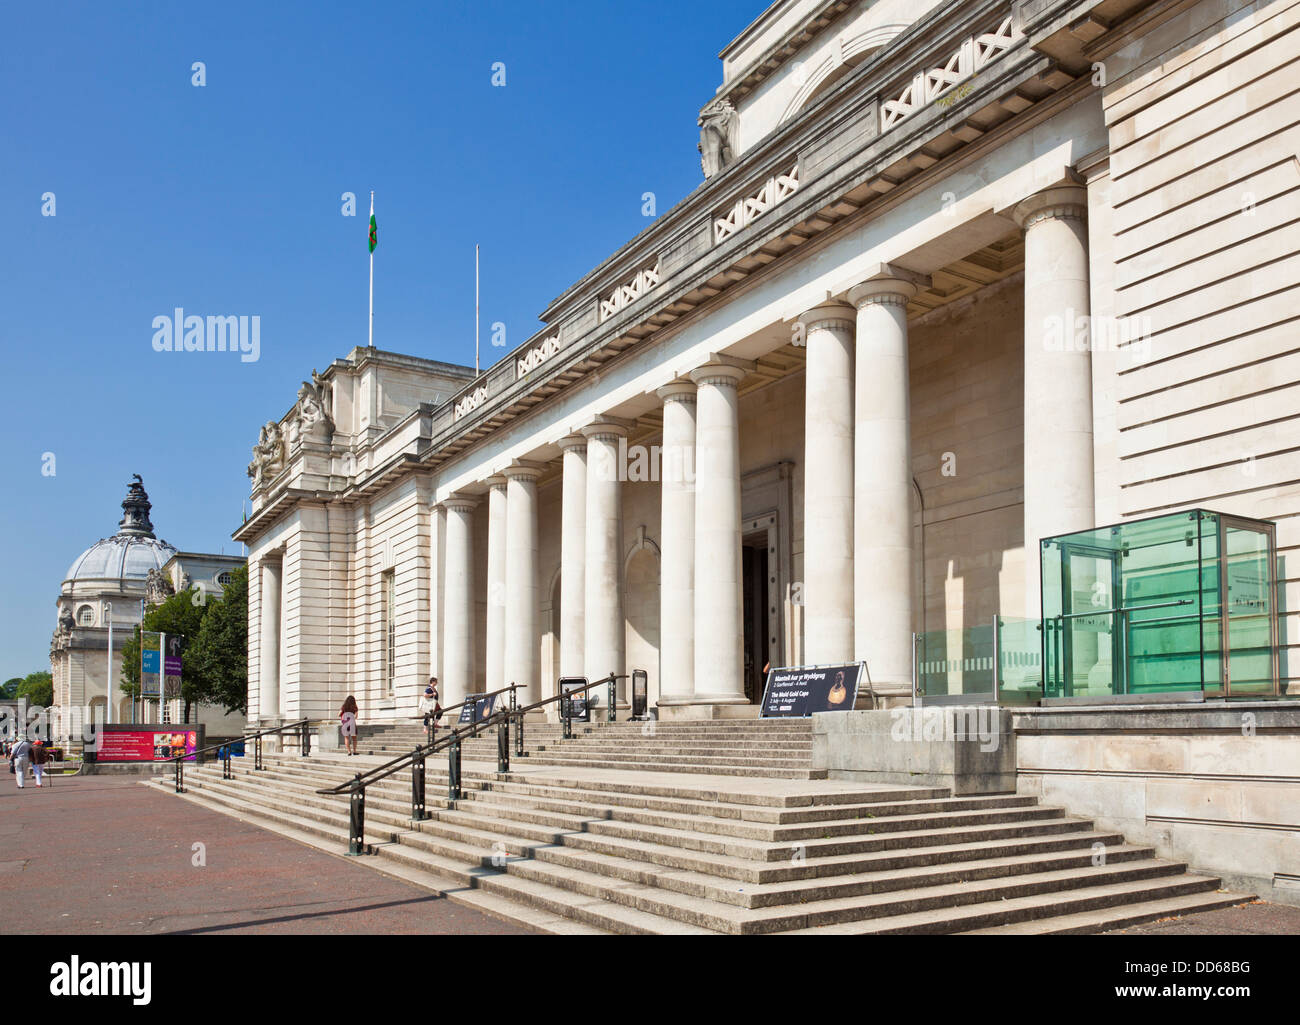 National Museum of Wales, Cardiff Cardiff Cathays Park South Glamorgan South Wales GB UK EU Europe Banque D'Images